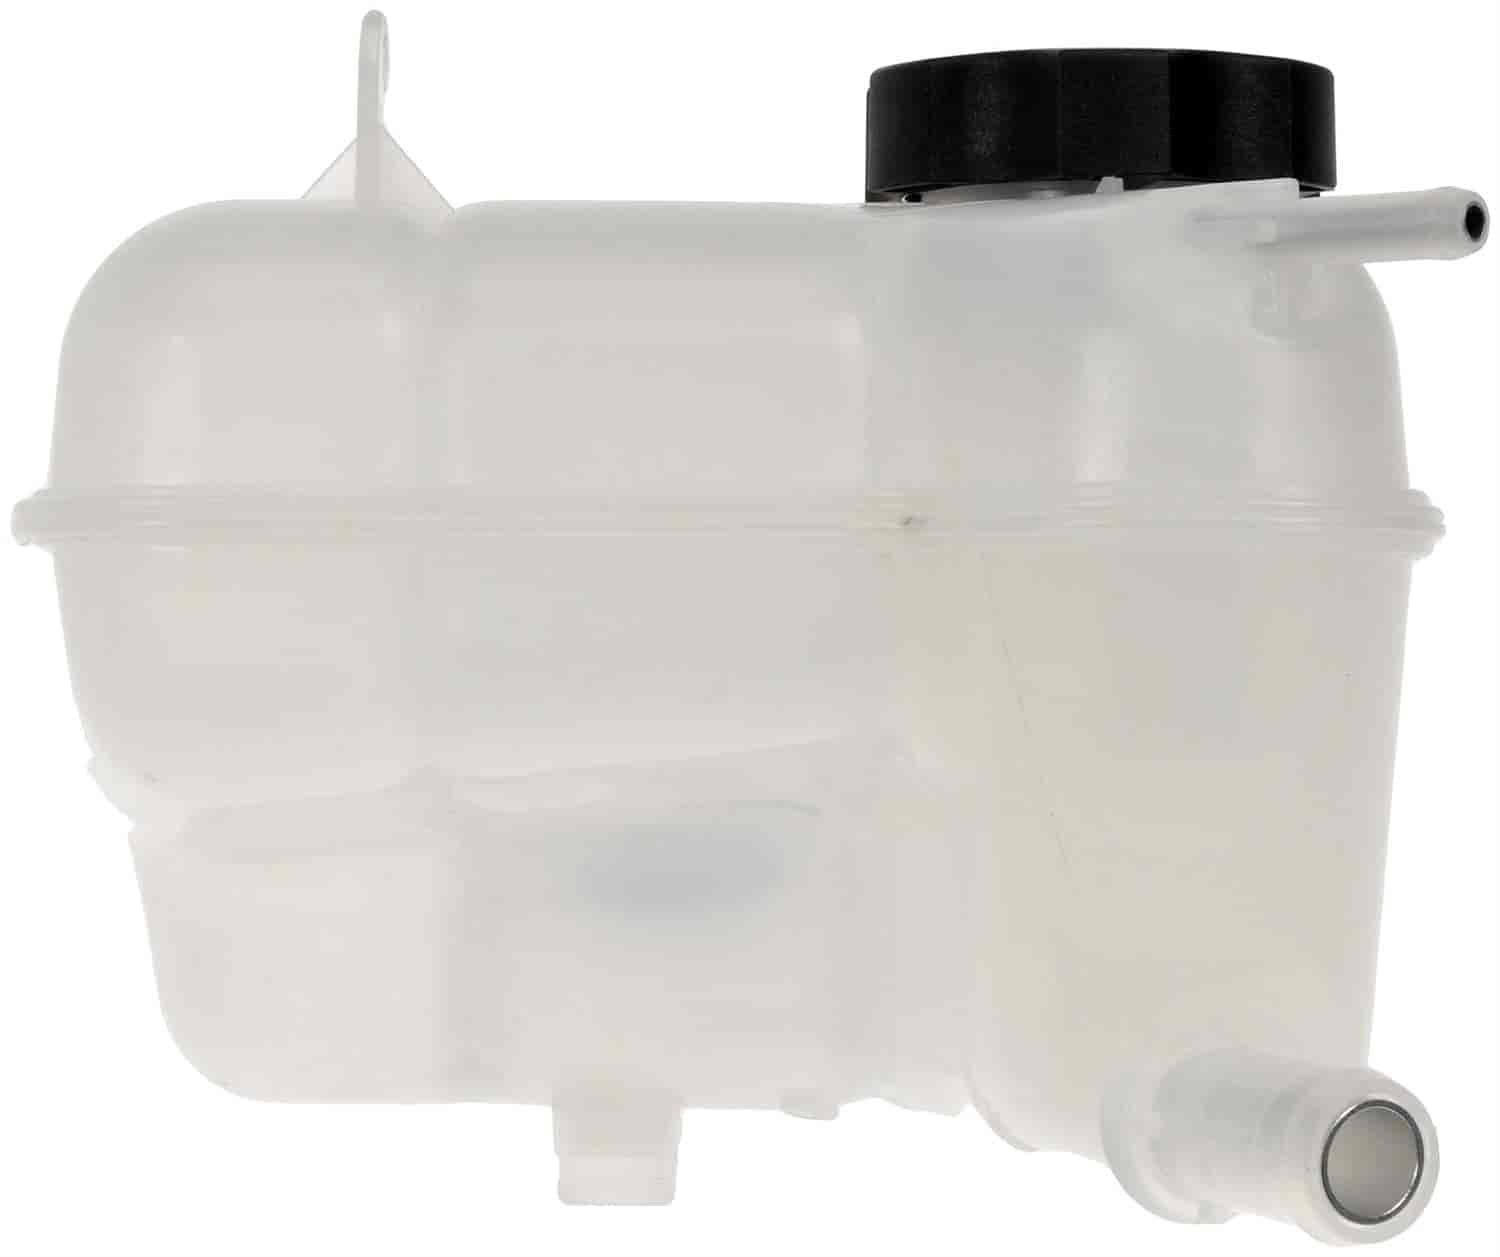 Pressurized Coolant Reservoir 2010-2017 Buick, 2010-2019 Chevy/Cadillac